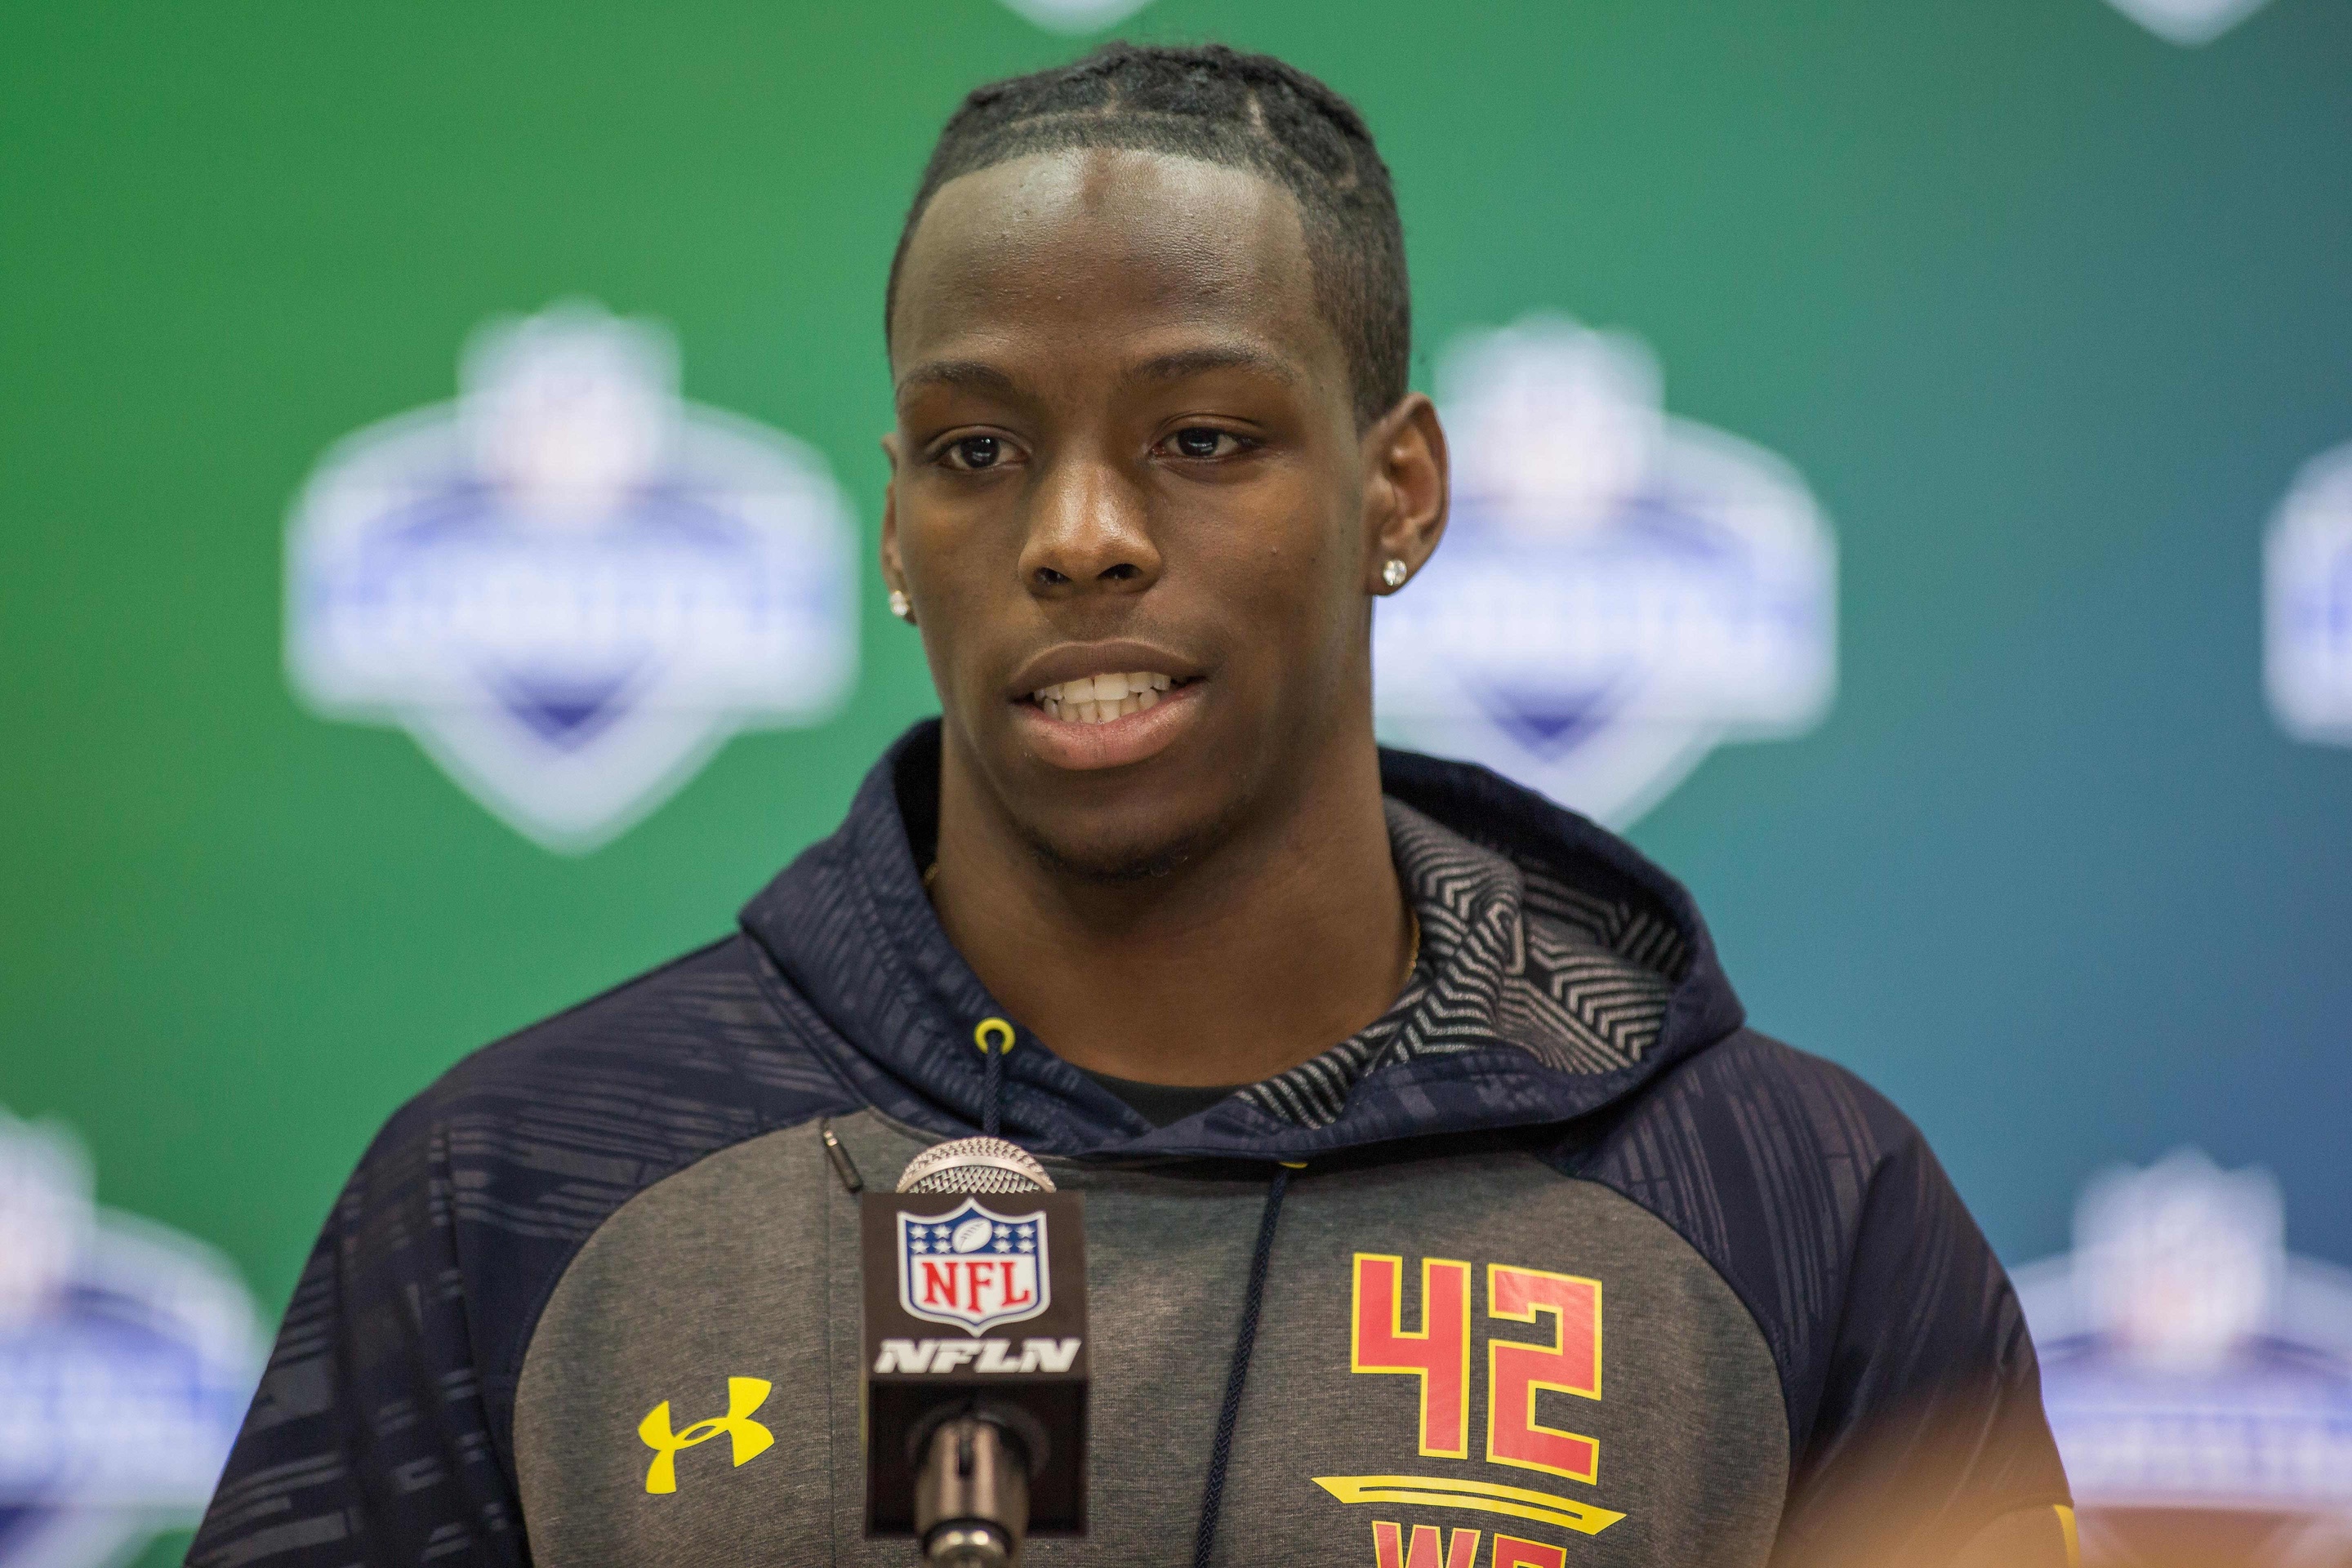 John Ross Sets 40 Yard Dash Record At The Nfl Combine